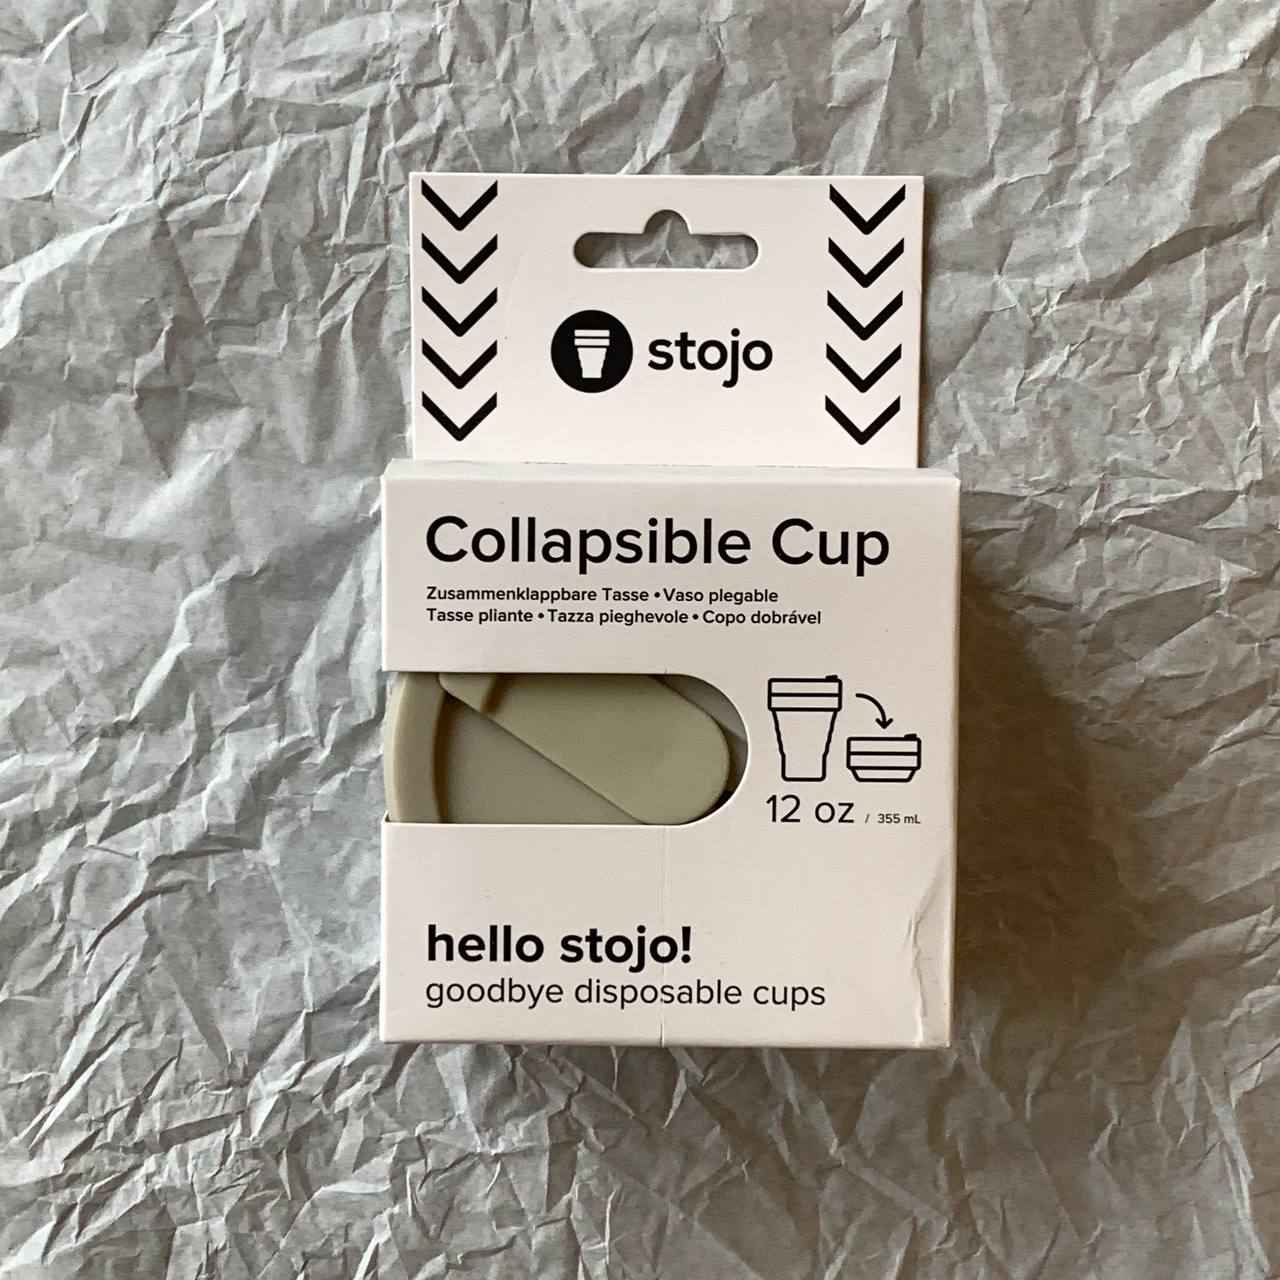 Collapsible cup | Stojo